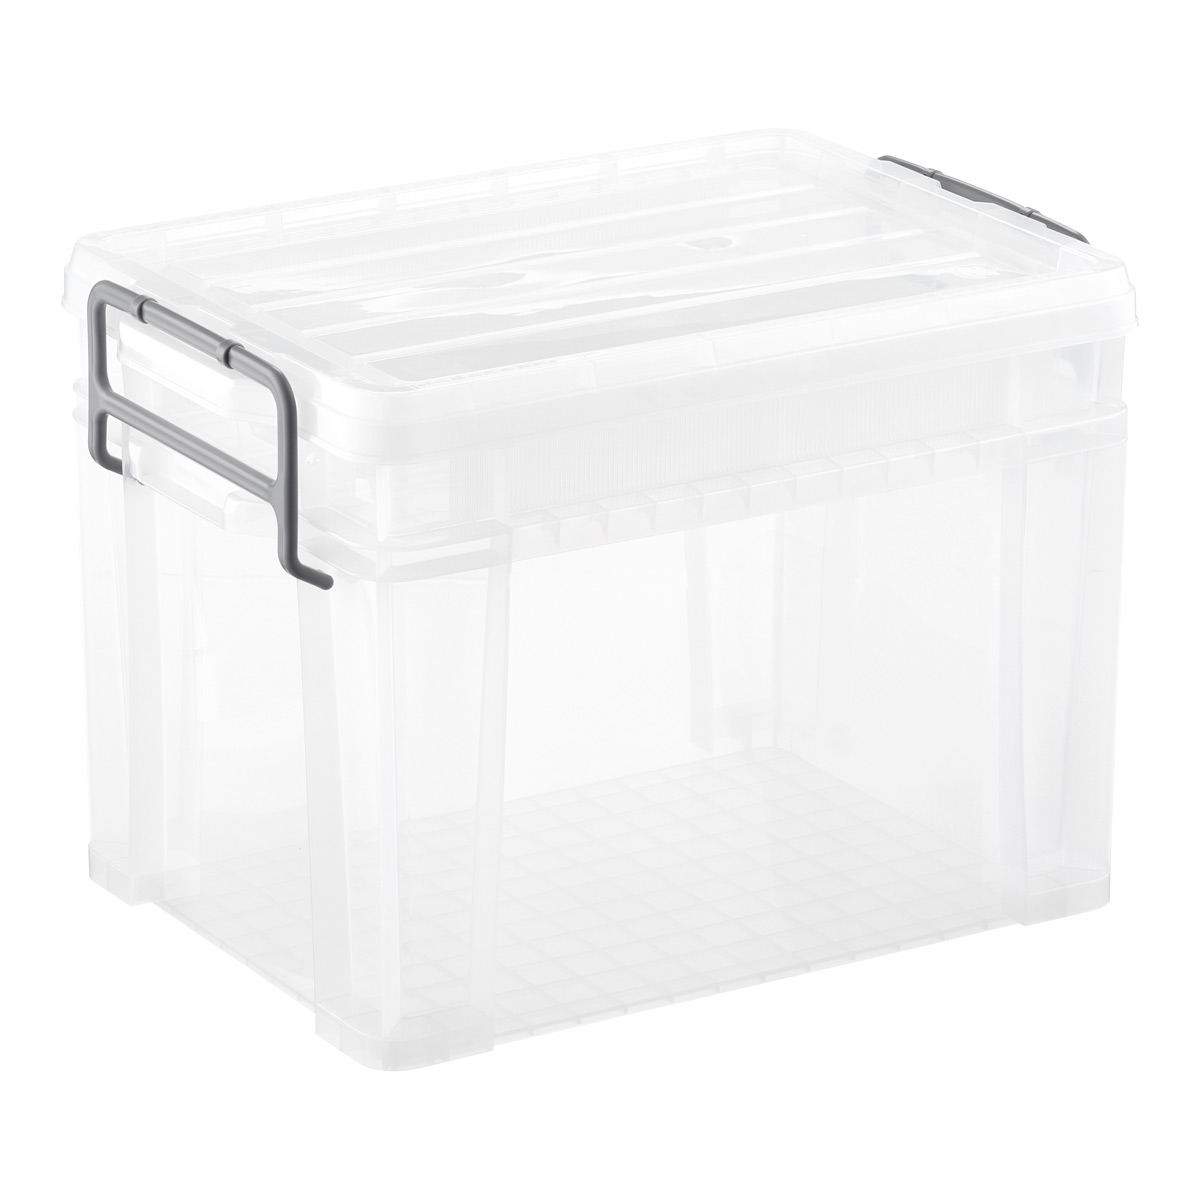 Double-Tier Utility Boxes | The Container Store